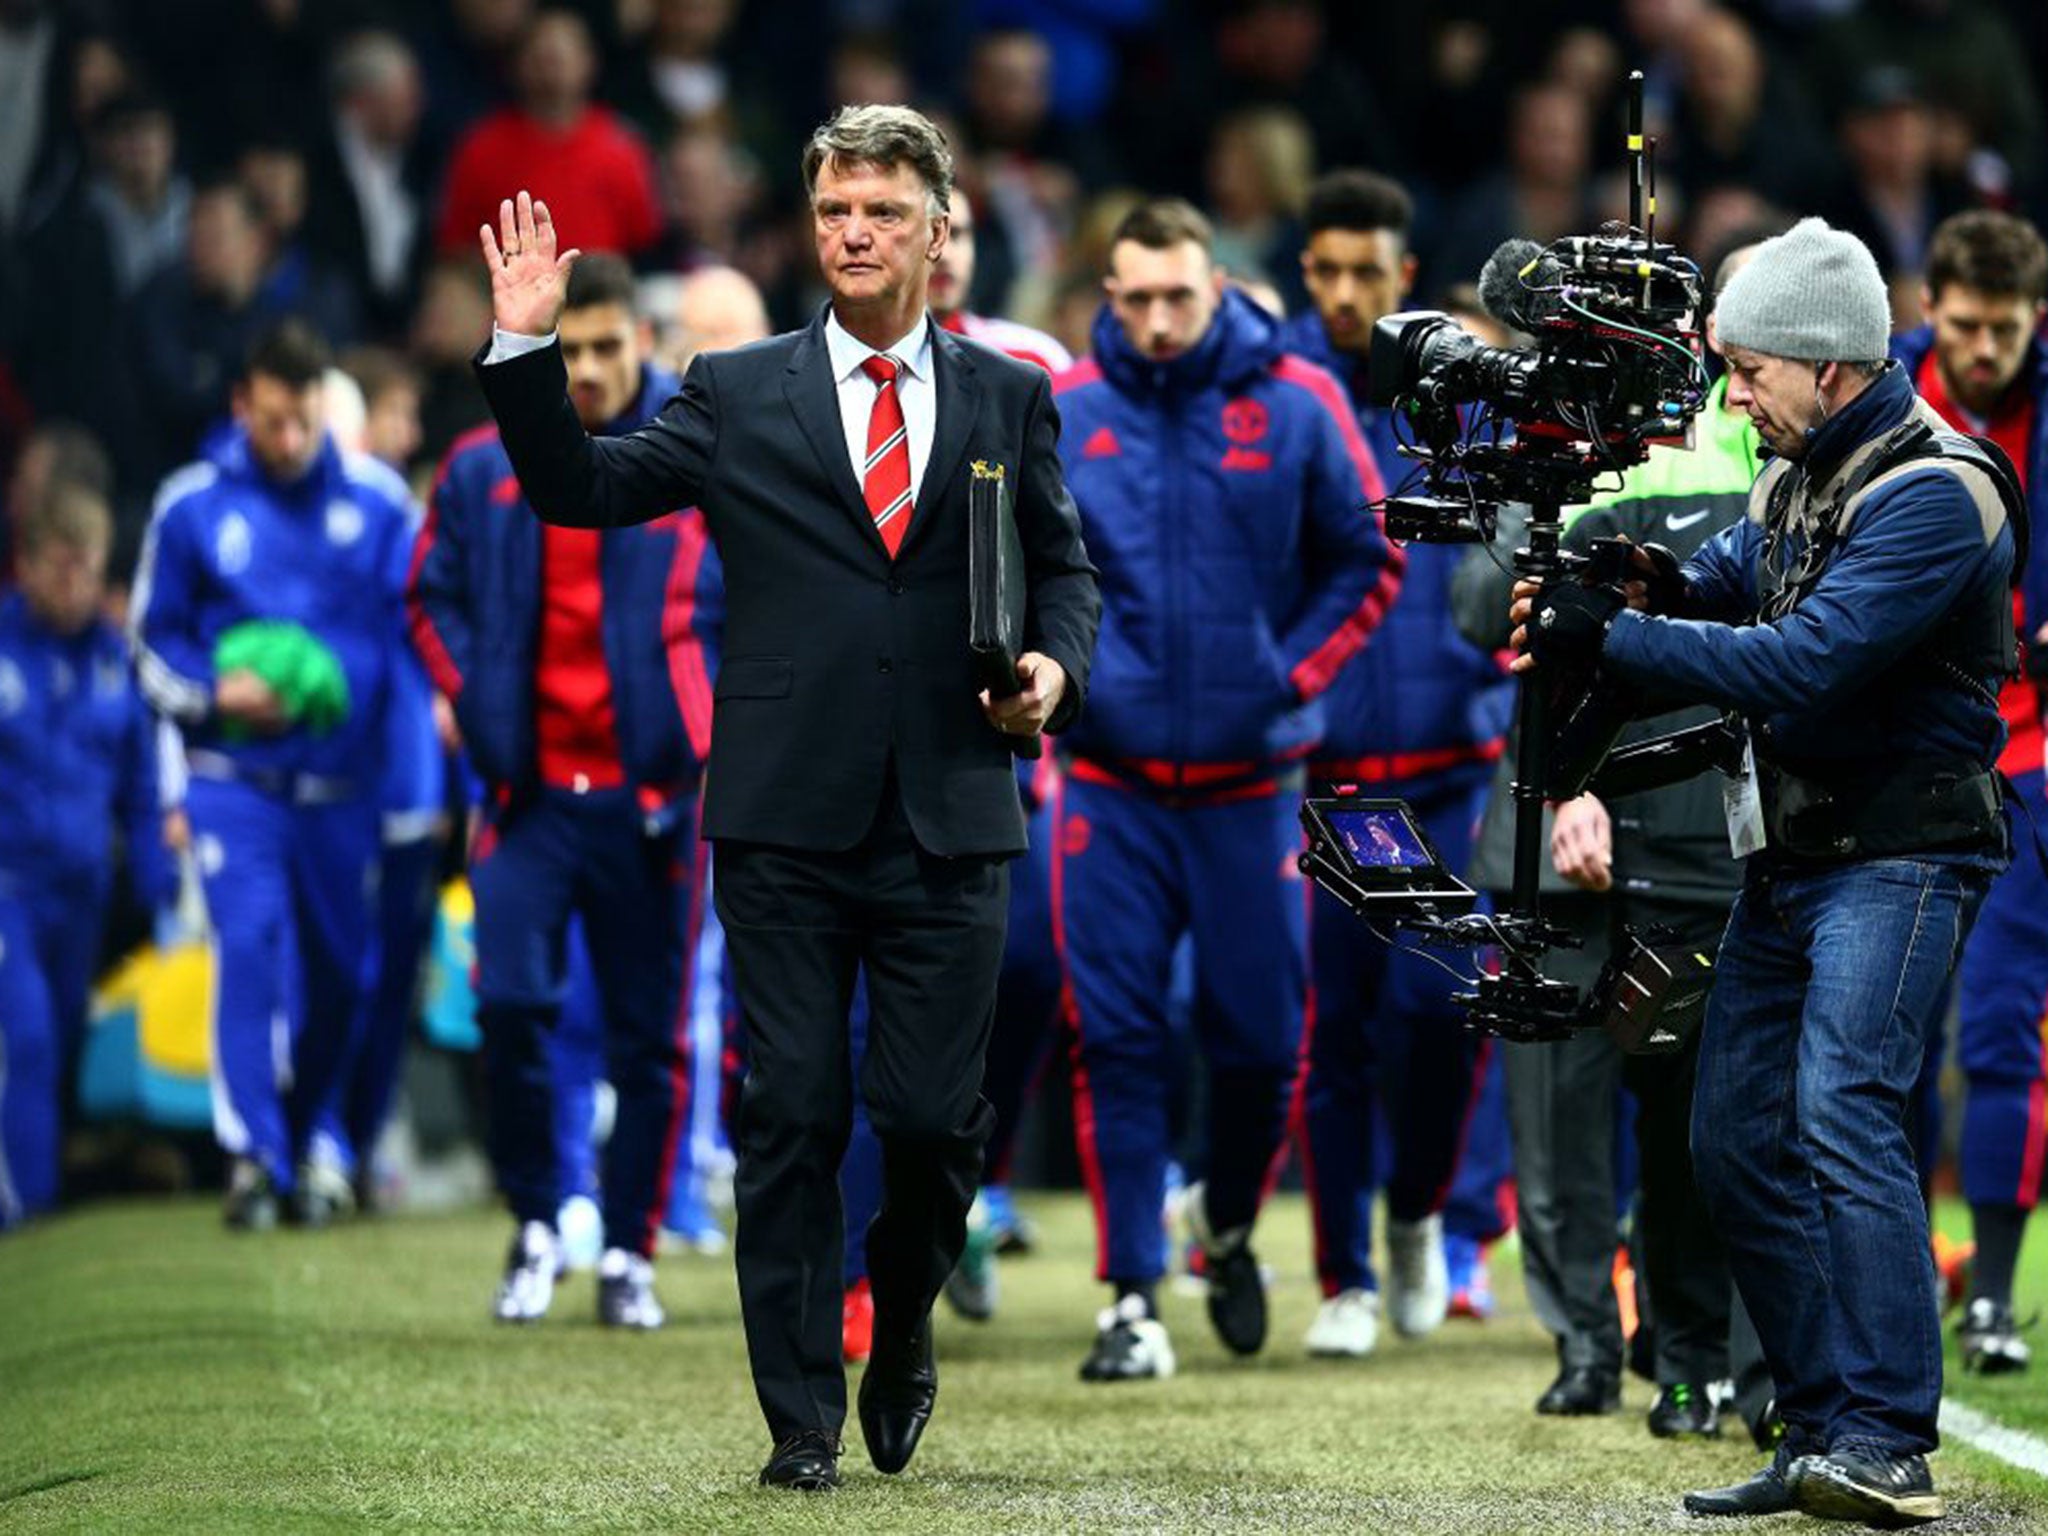 The Manchester United manager, Louis van Gaal, left, before the game at Old Trafford